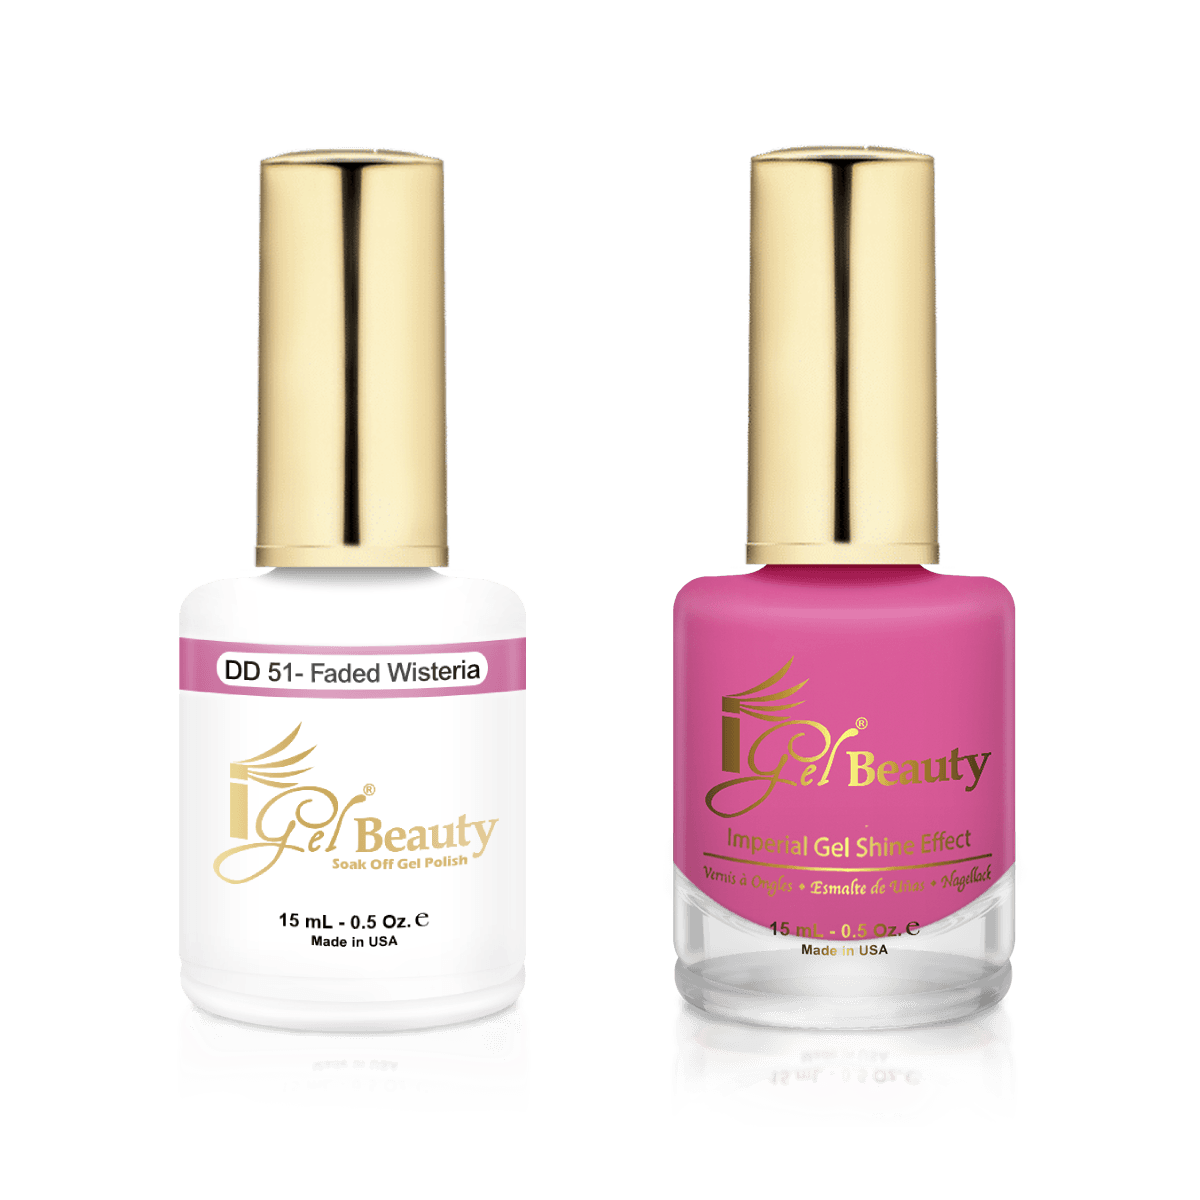 IGel Duo Gel Polish + Matching Nail Lacquer DD 51 FADED WISTERIA